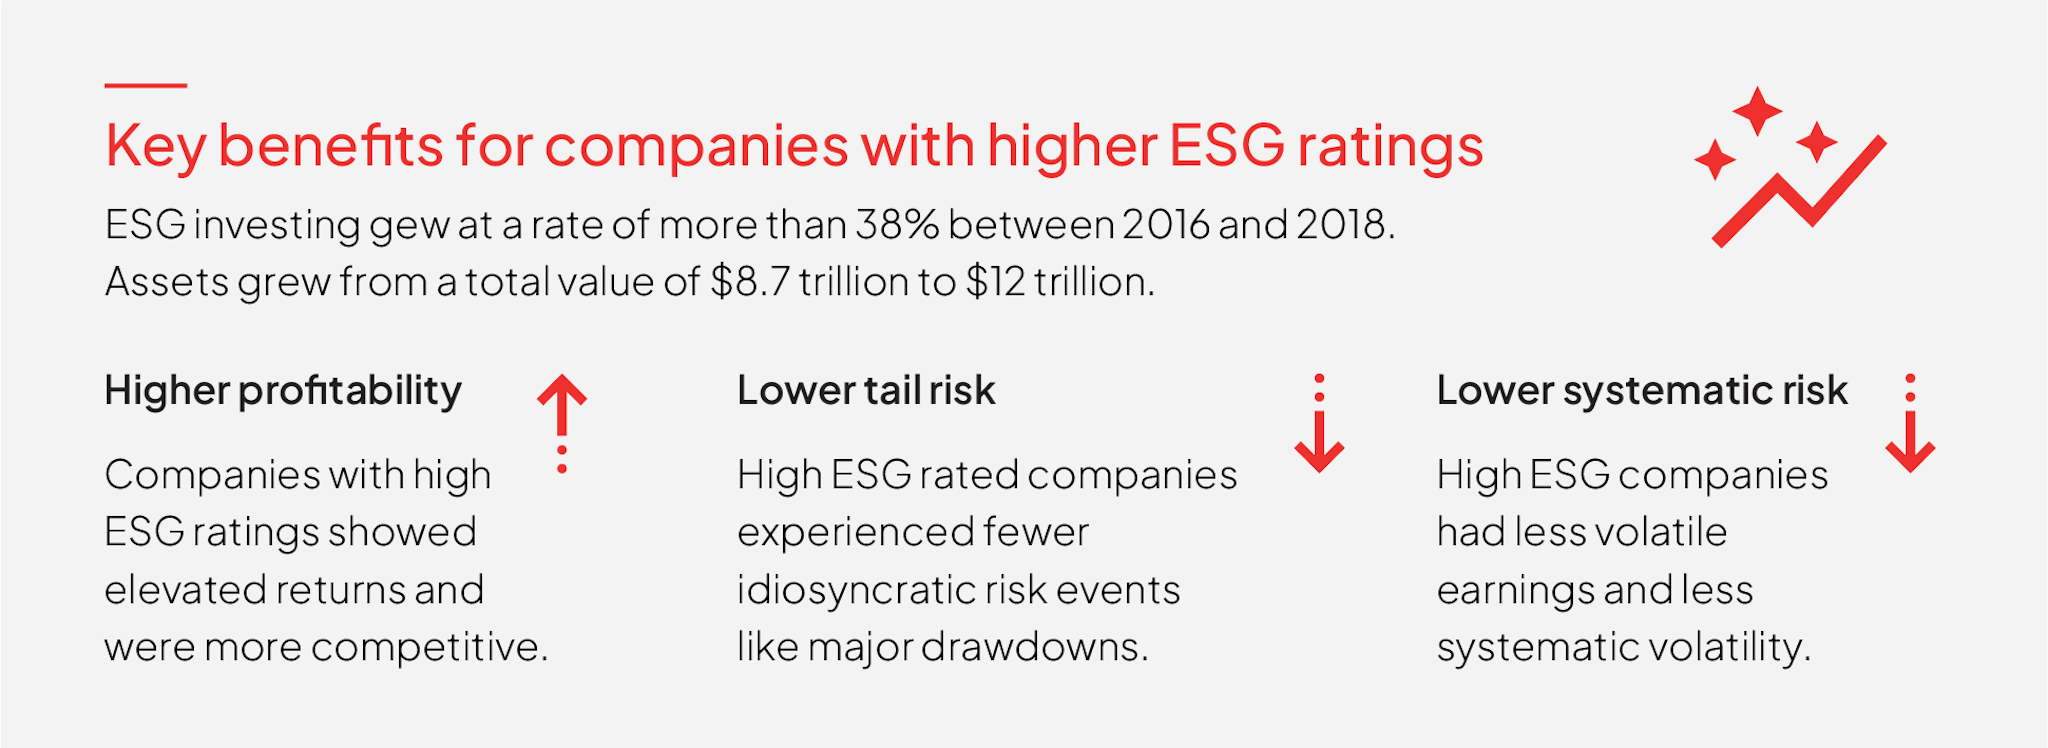 Key benefits for companies with higher ESG ratings: ESG investing grew at a rate of more than 35% between 2016 and 2018.